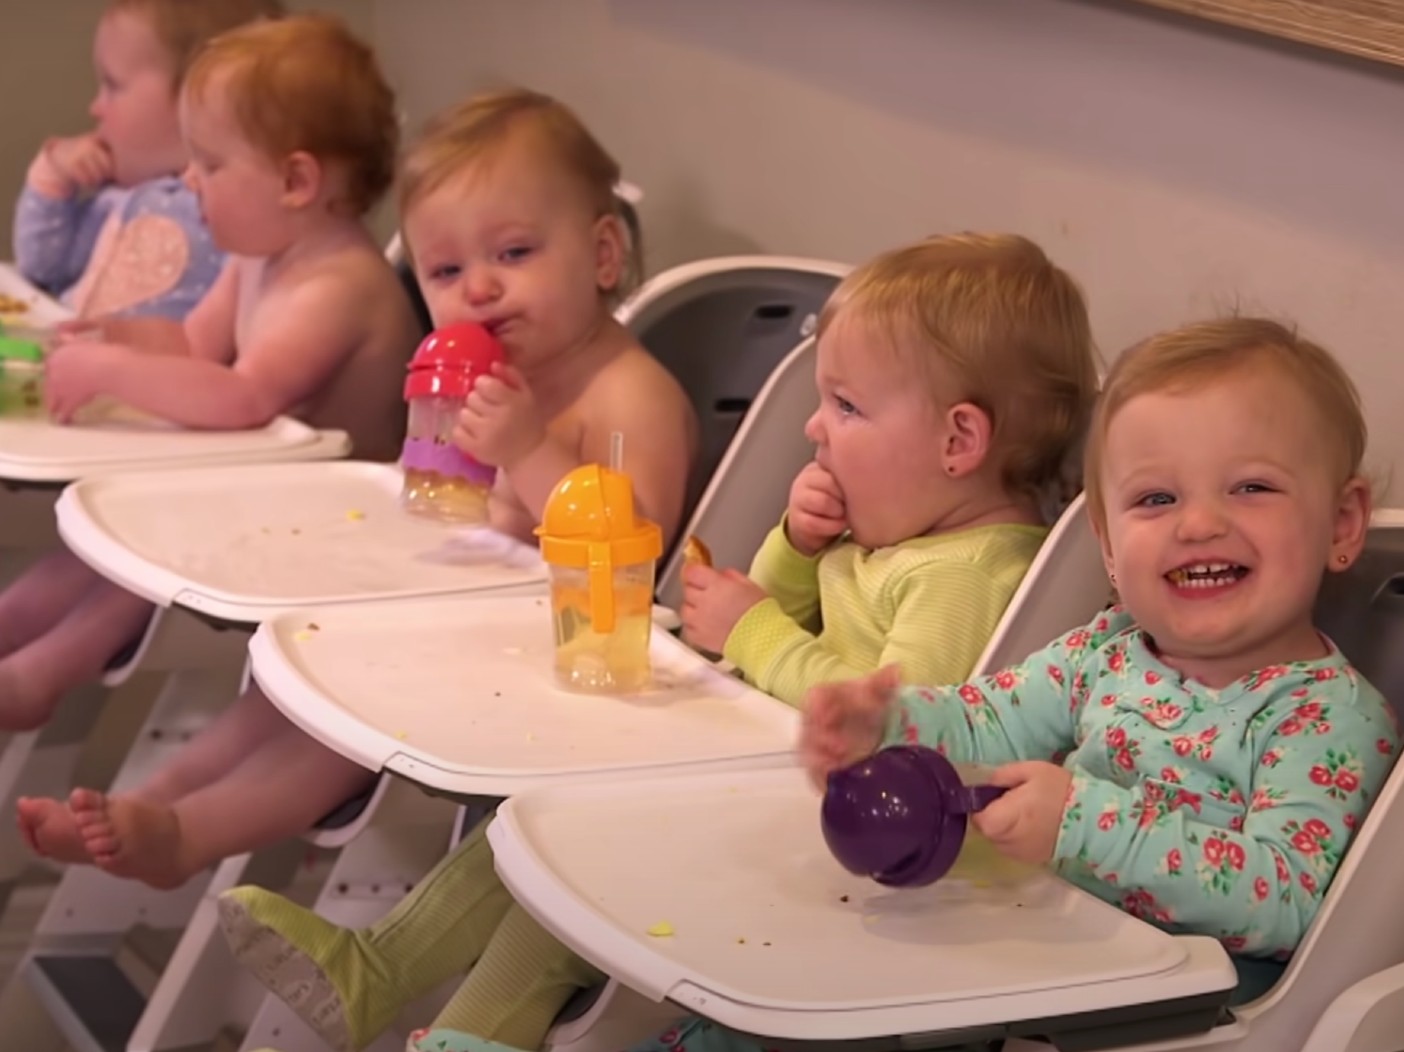 Will “OutDaughtered,” Return for A 9th Season?